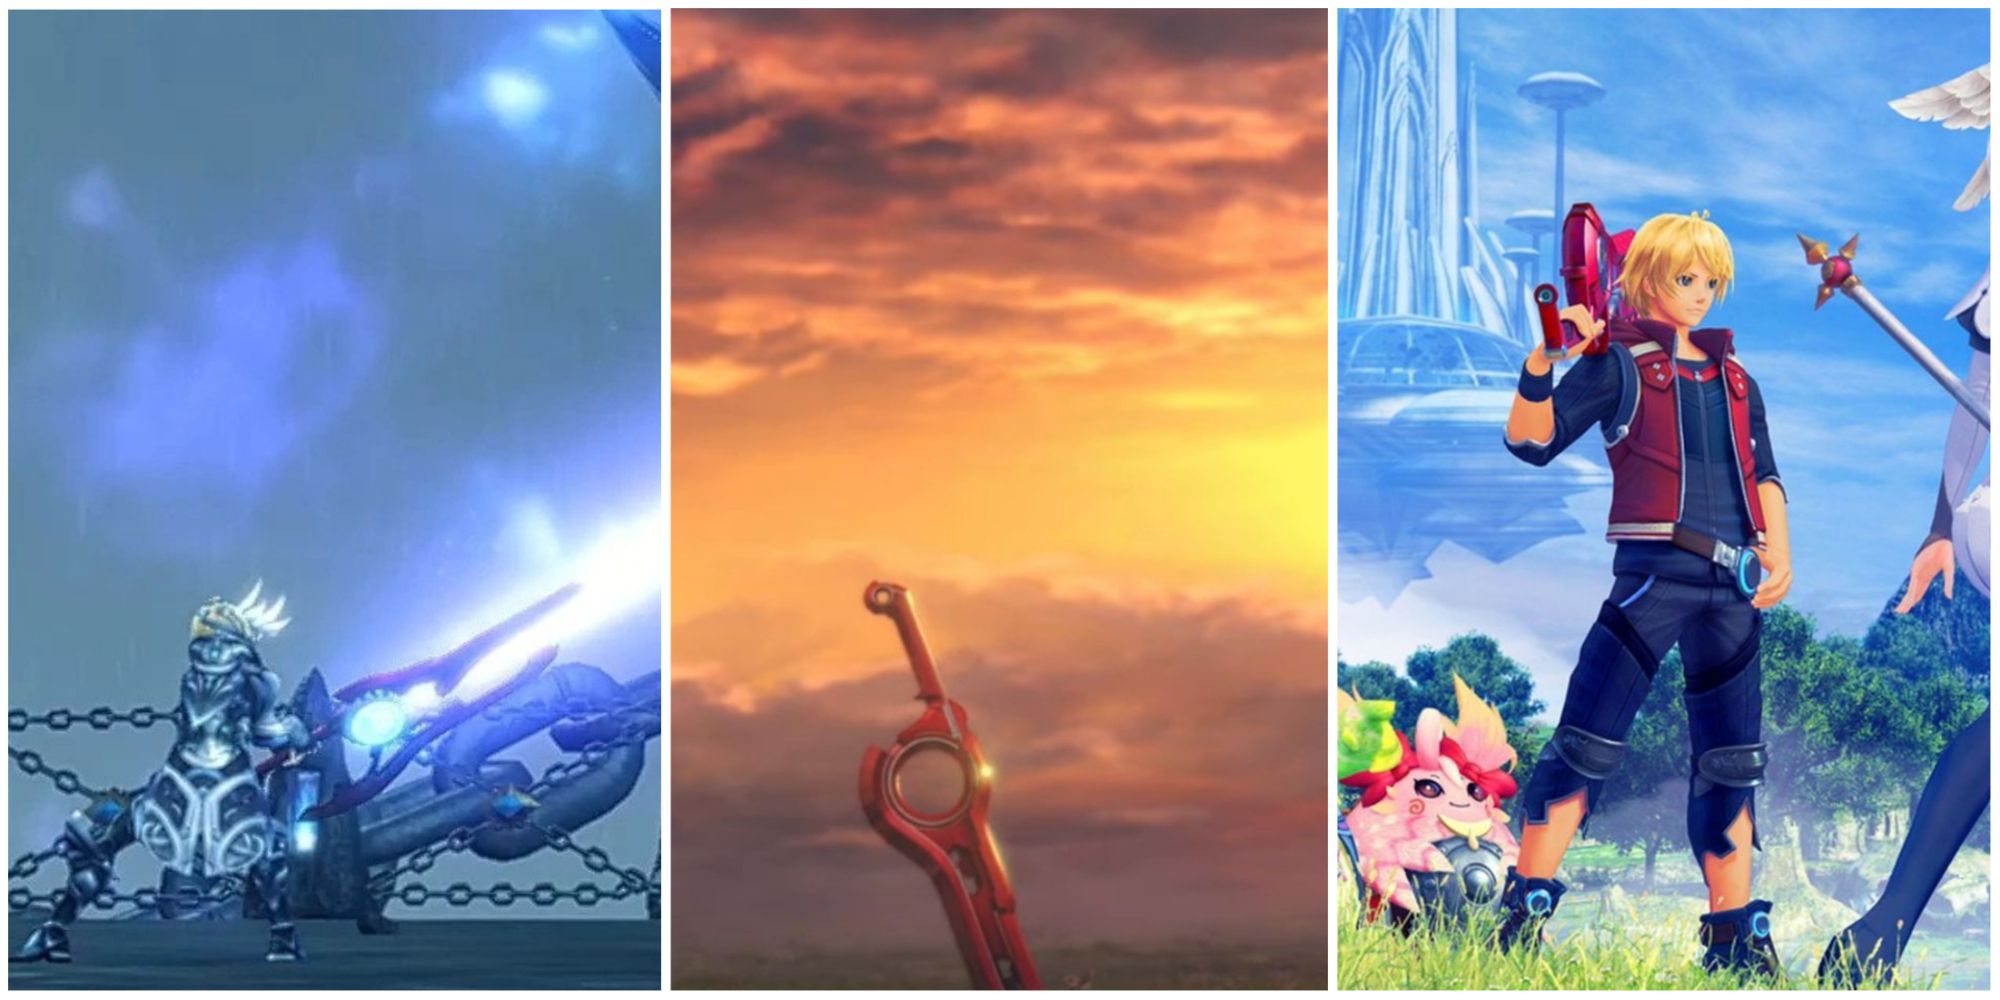 Shulk wielding the Monado II, the original Monado in the ground by the sunset, Shulk holding the Monado Replica EX on his shoulder beside others, left to right